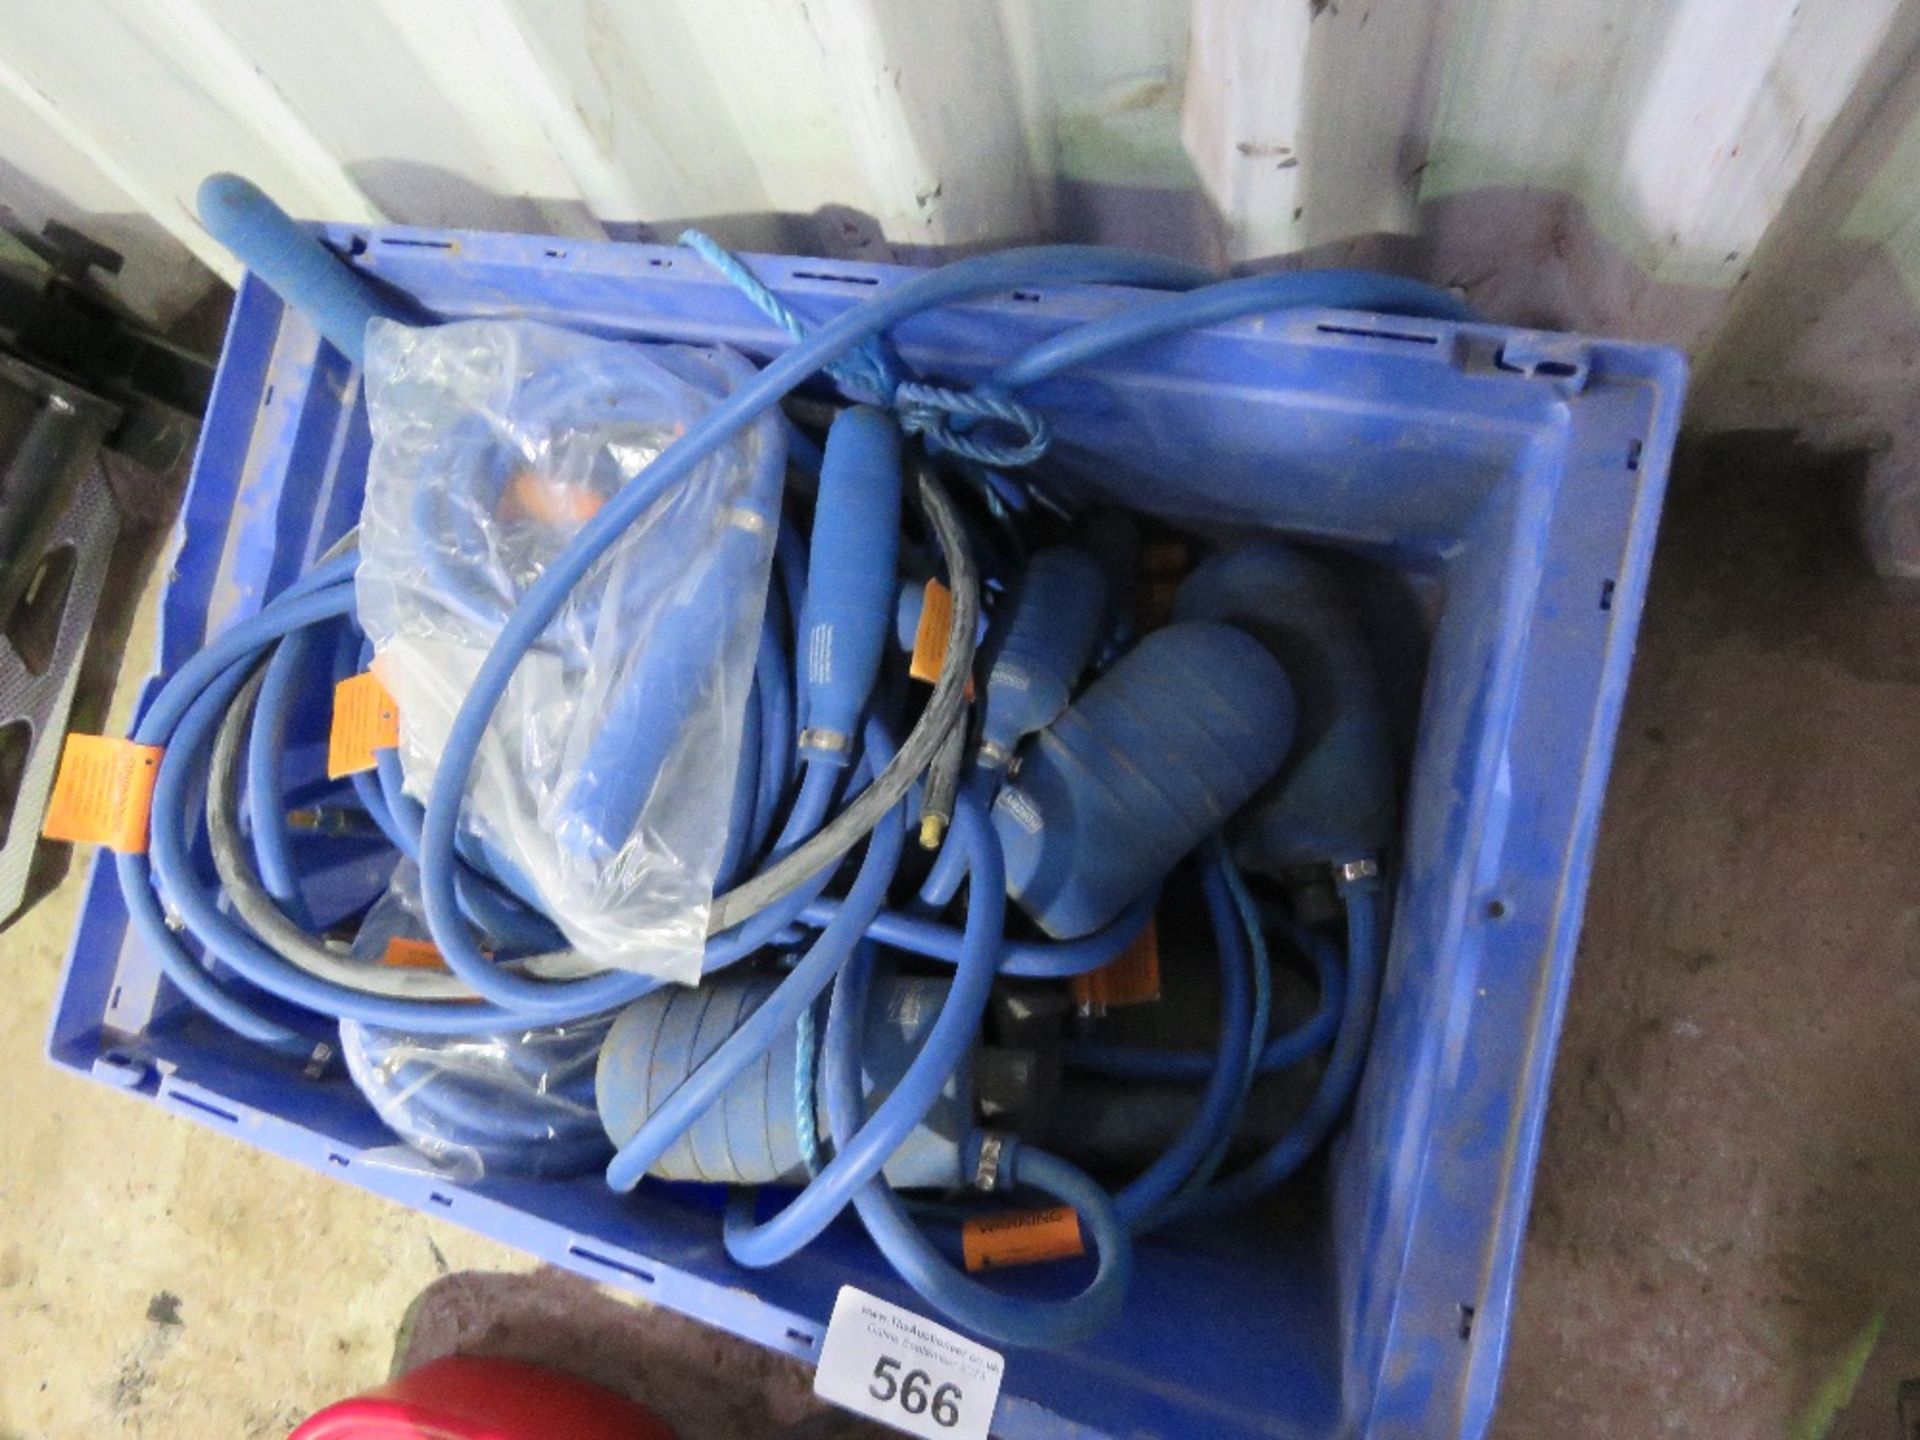 BOX OF ASSORTED INFLATABLE DRAIN TEST BUNGS ETC. THIS LOT IS SOLD UNDER THE AUCTIONEERS MARGIN SC